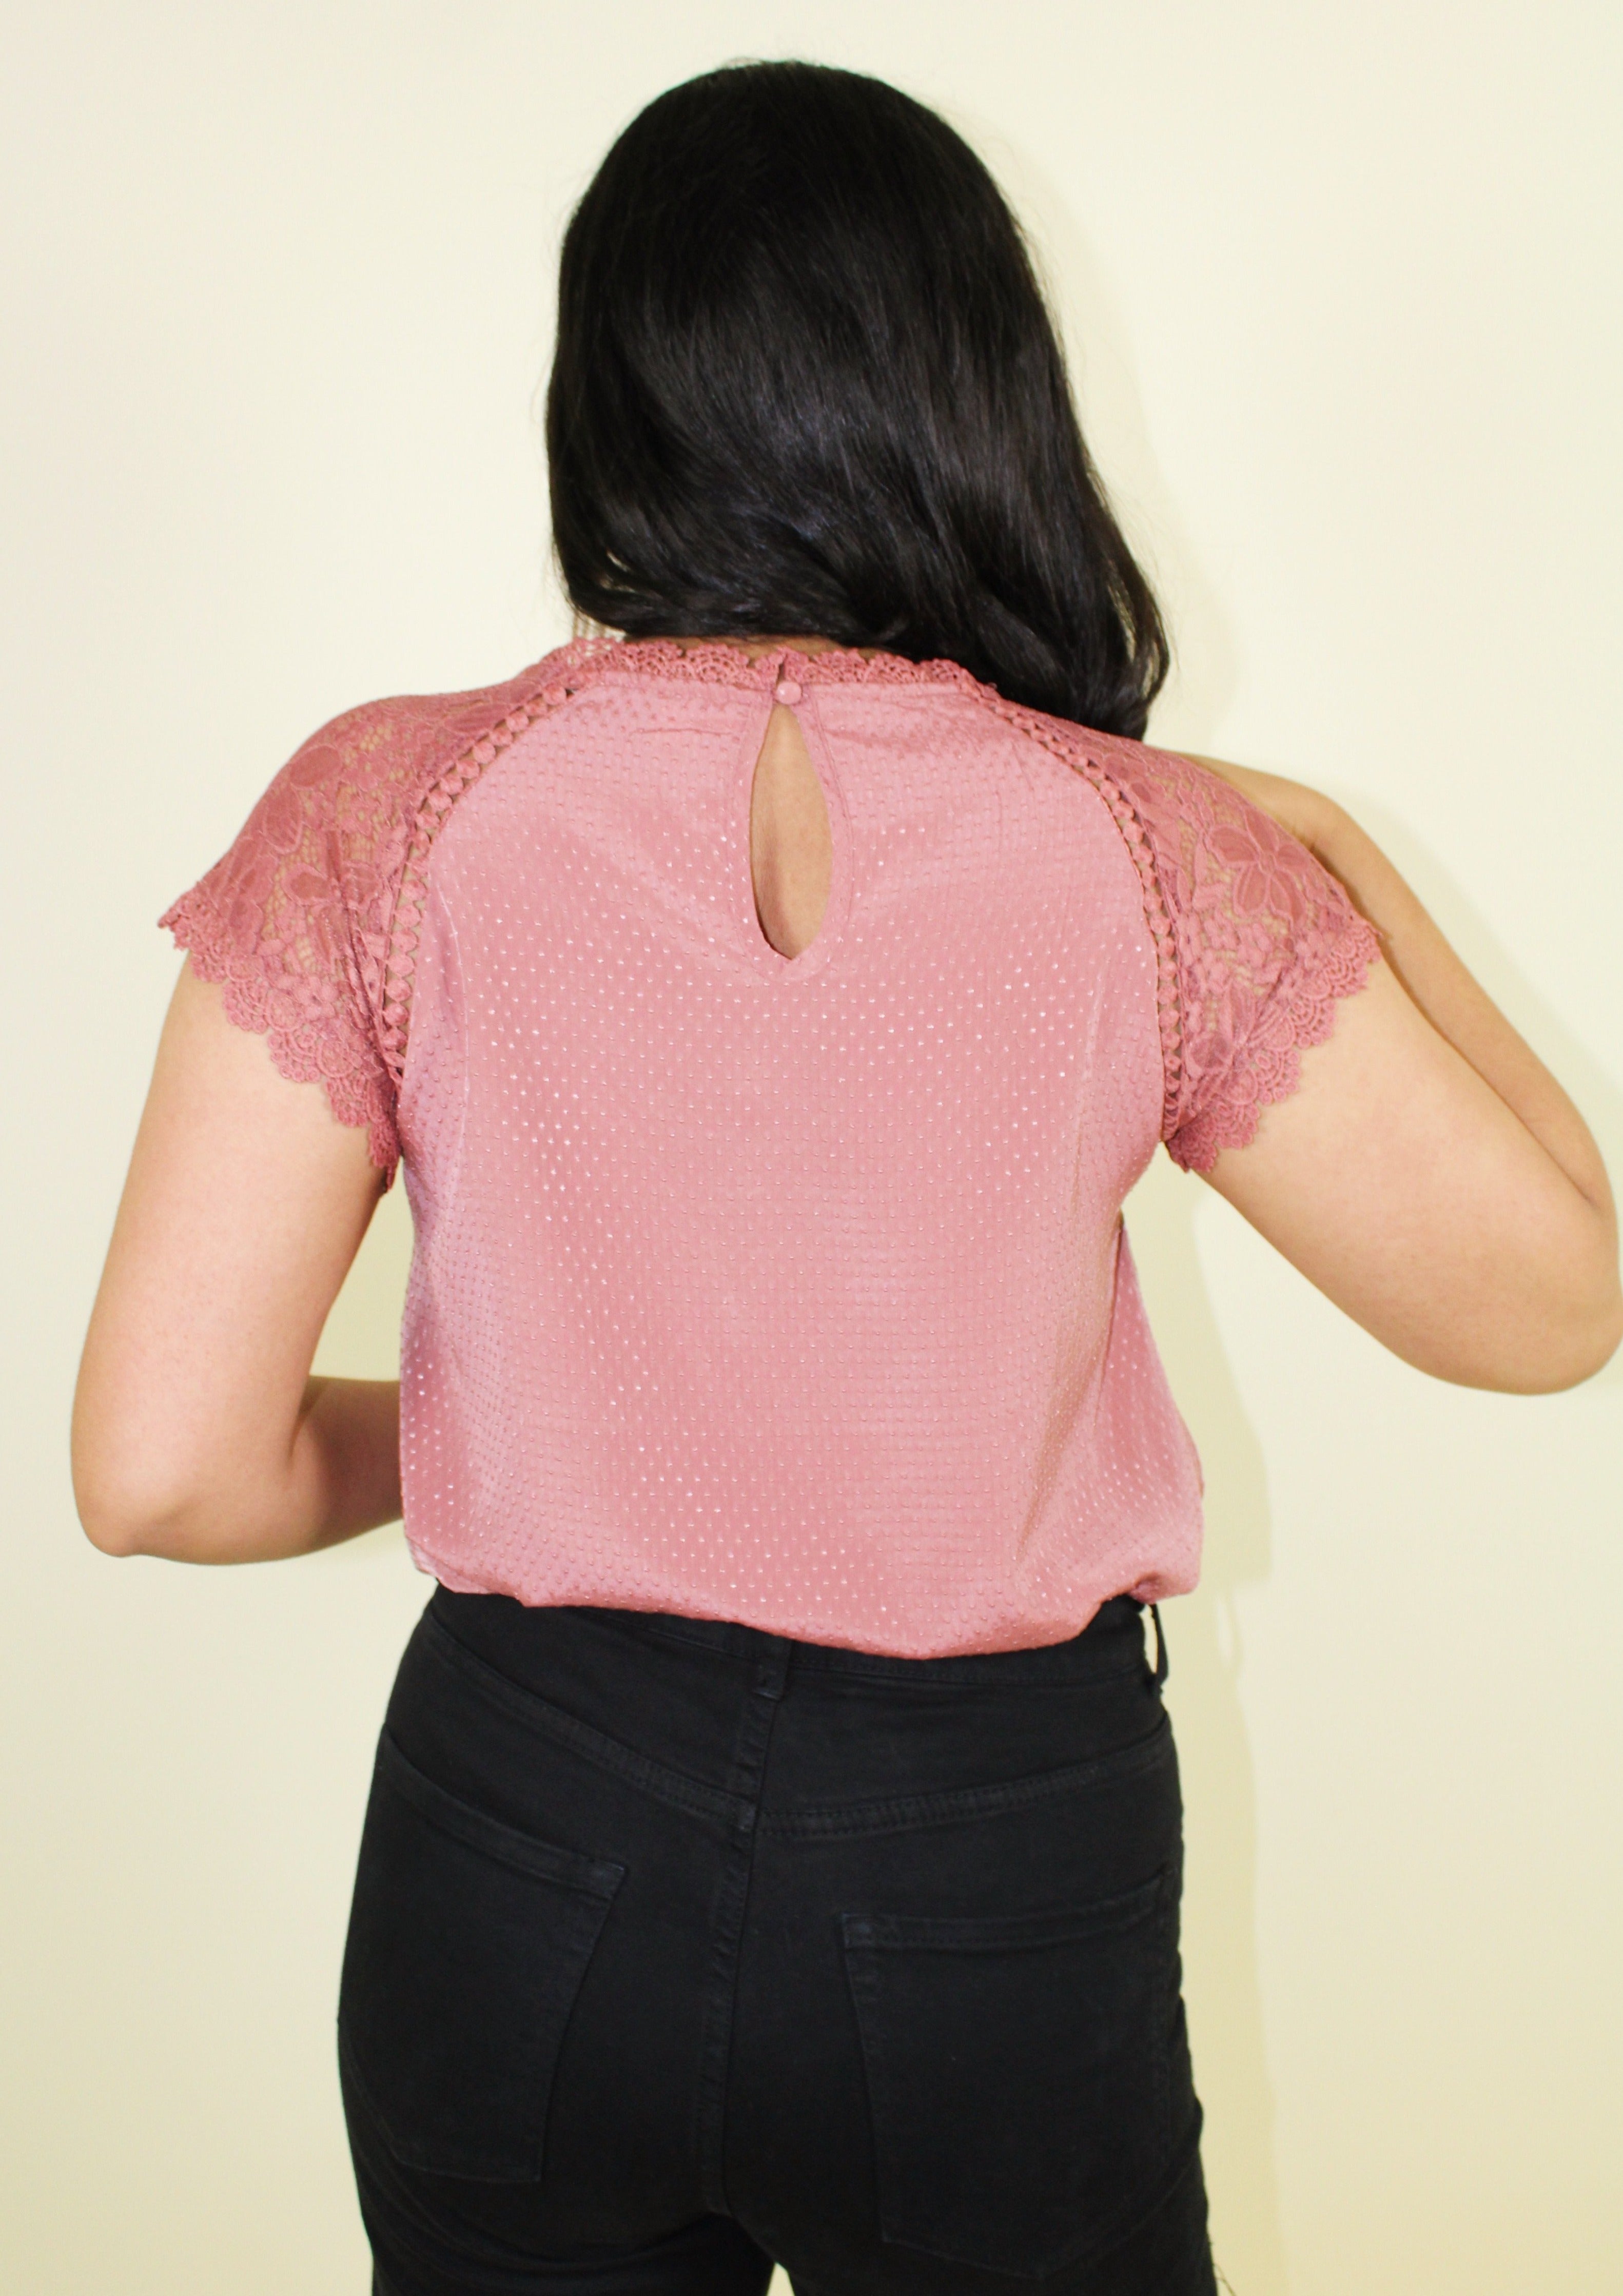 The Pretty in Pink Top